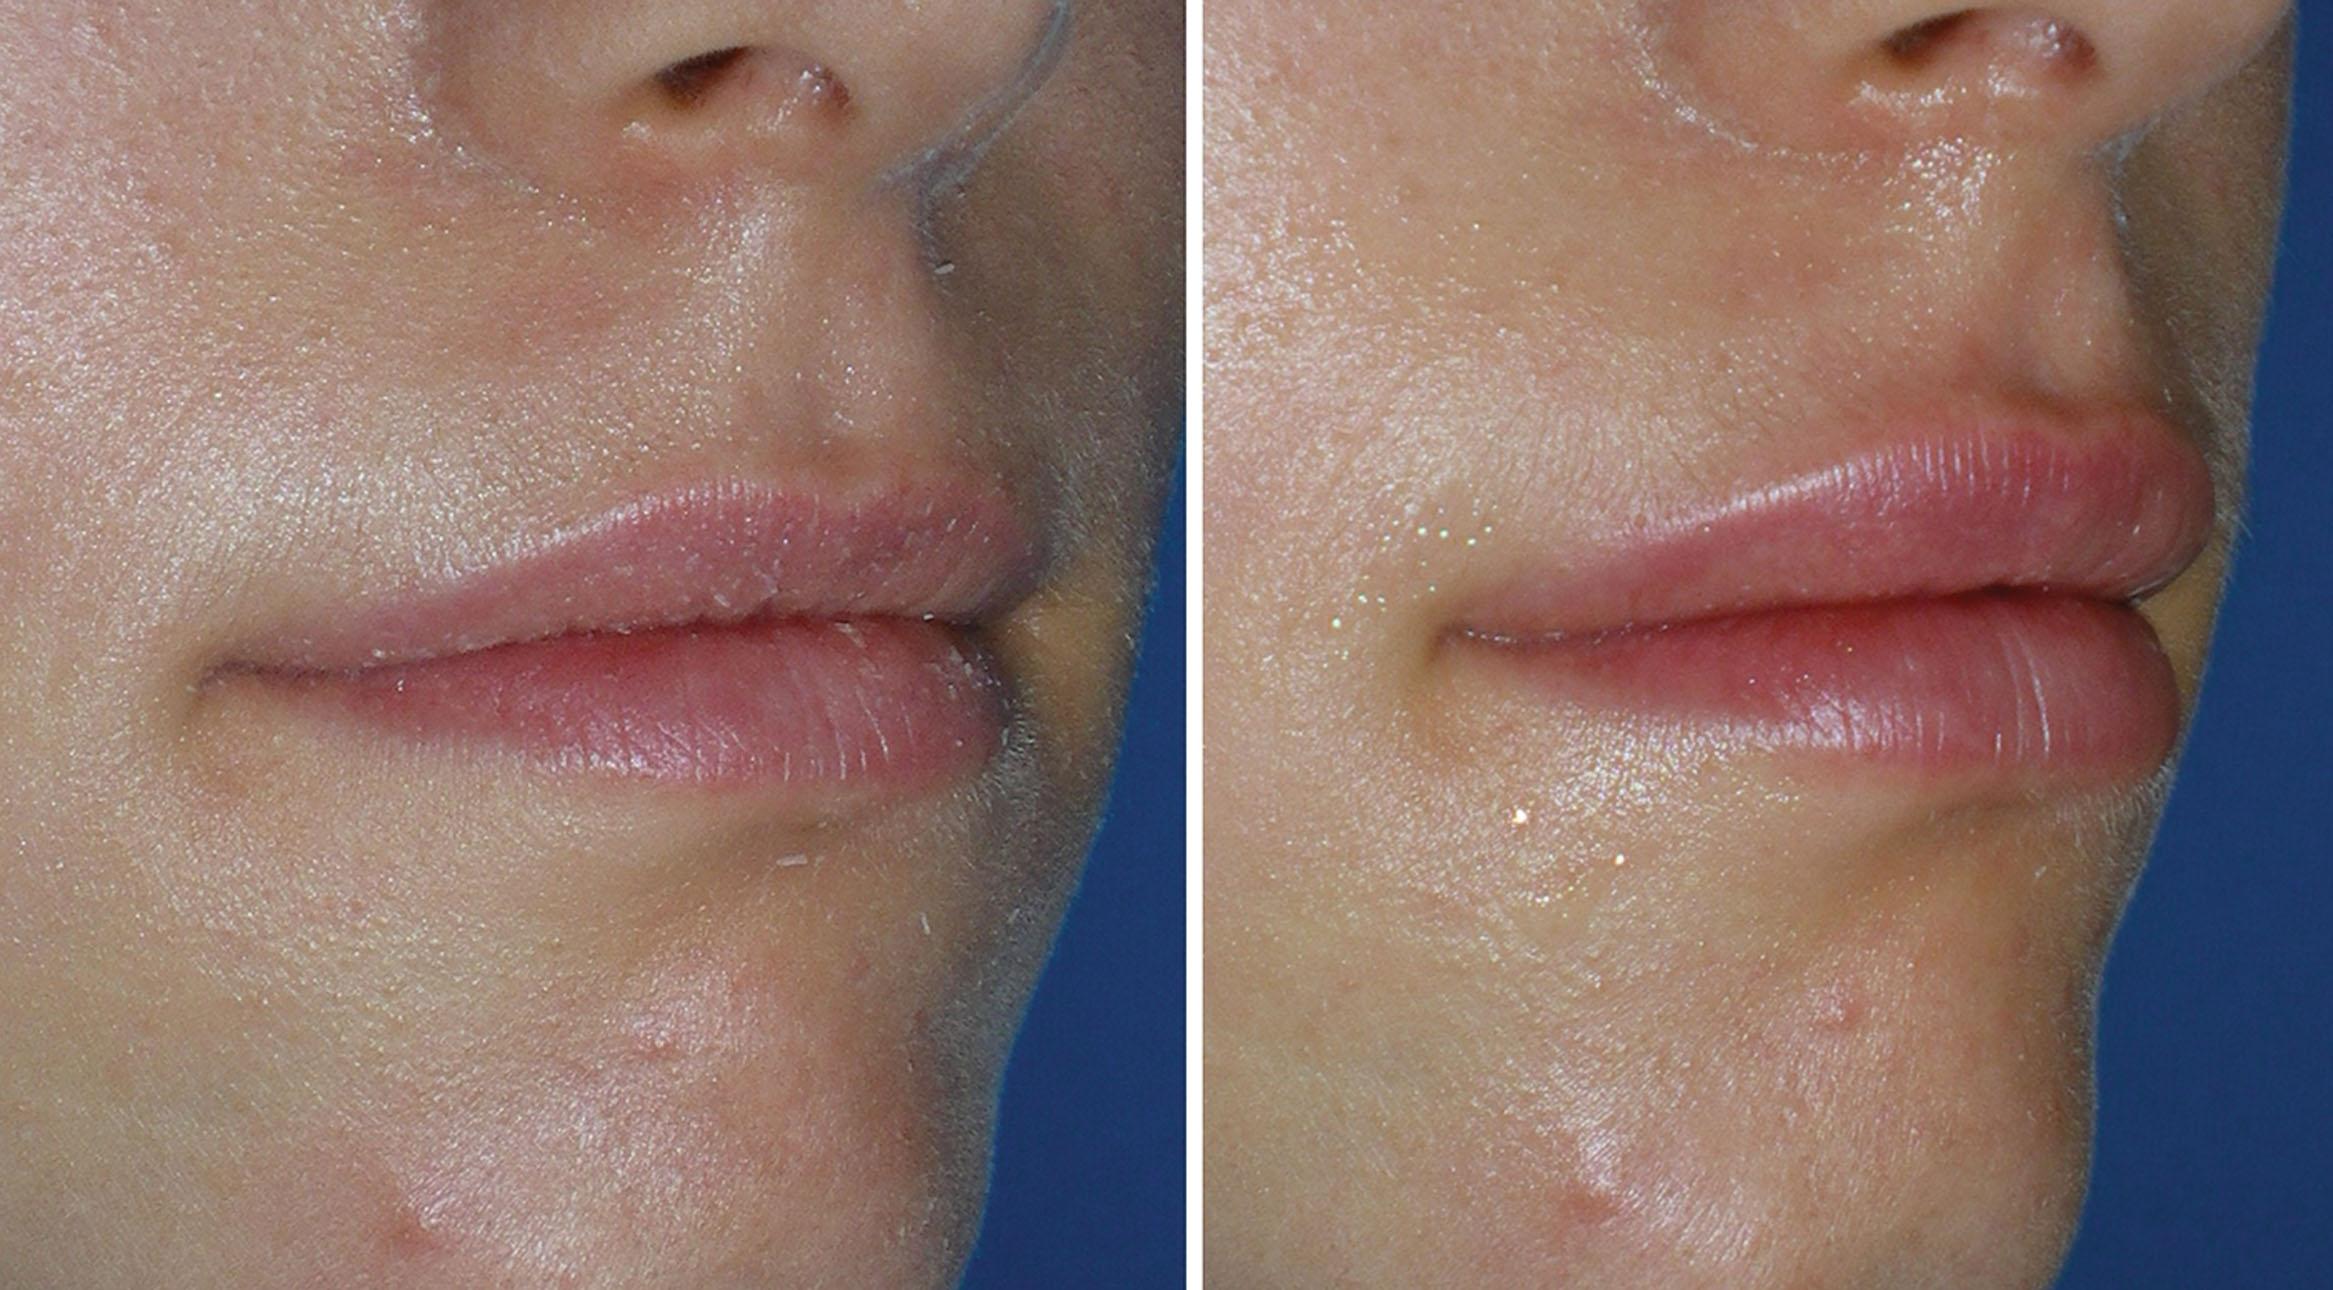 Fig. 10.40, This patient is shown before and after injection of 2 mL of hyaluronic acid filler for volume and white roll enhancement.